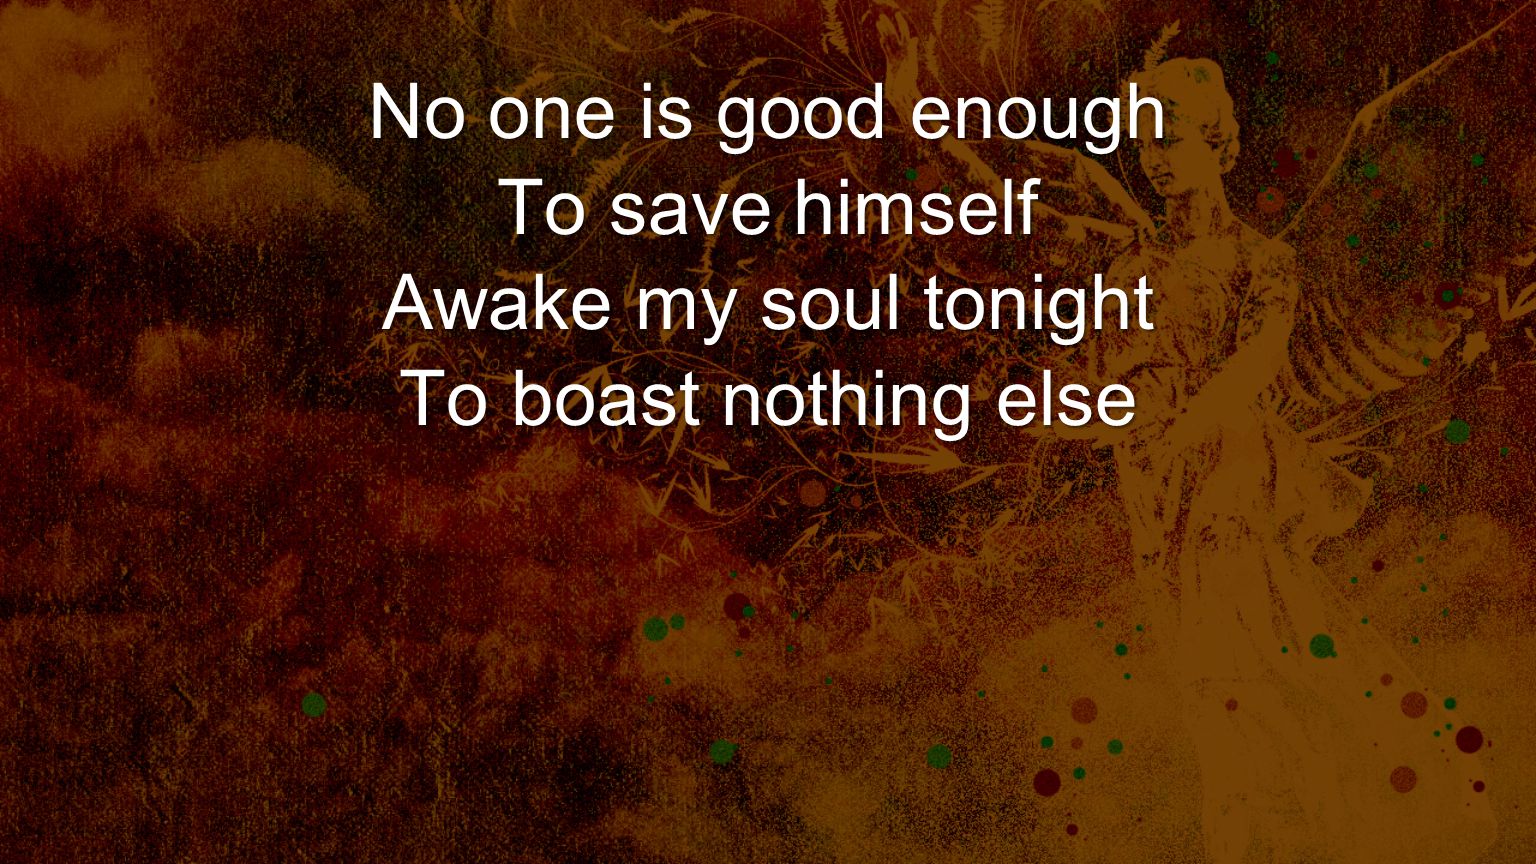 No one is good enough To save himself Awake my soul tonight To boast nothing else